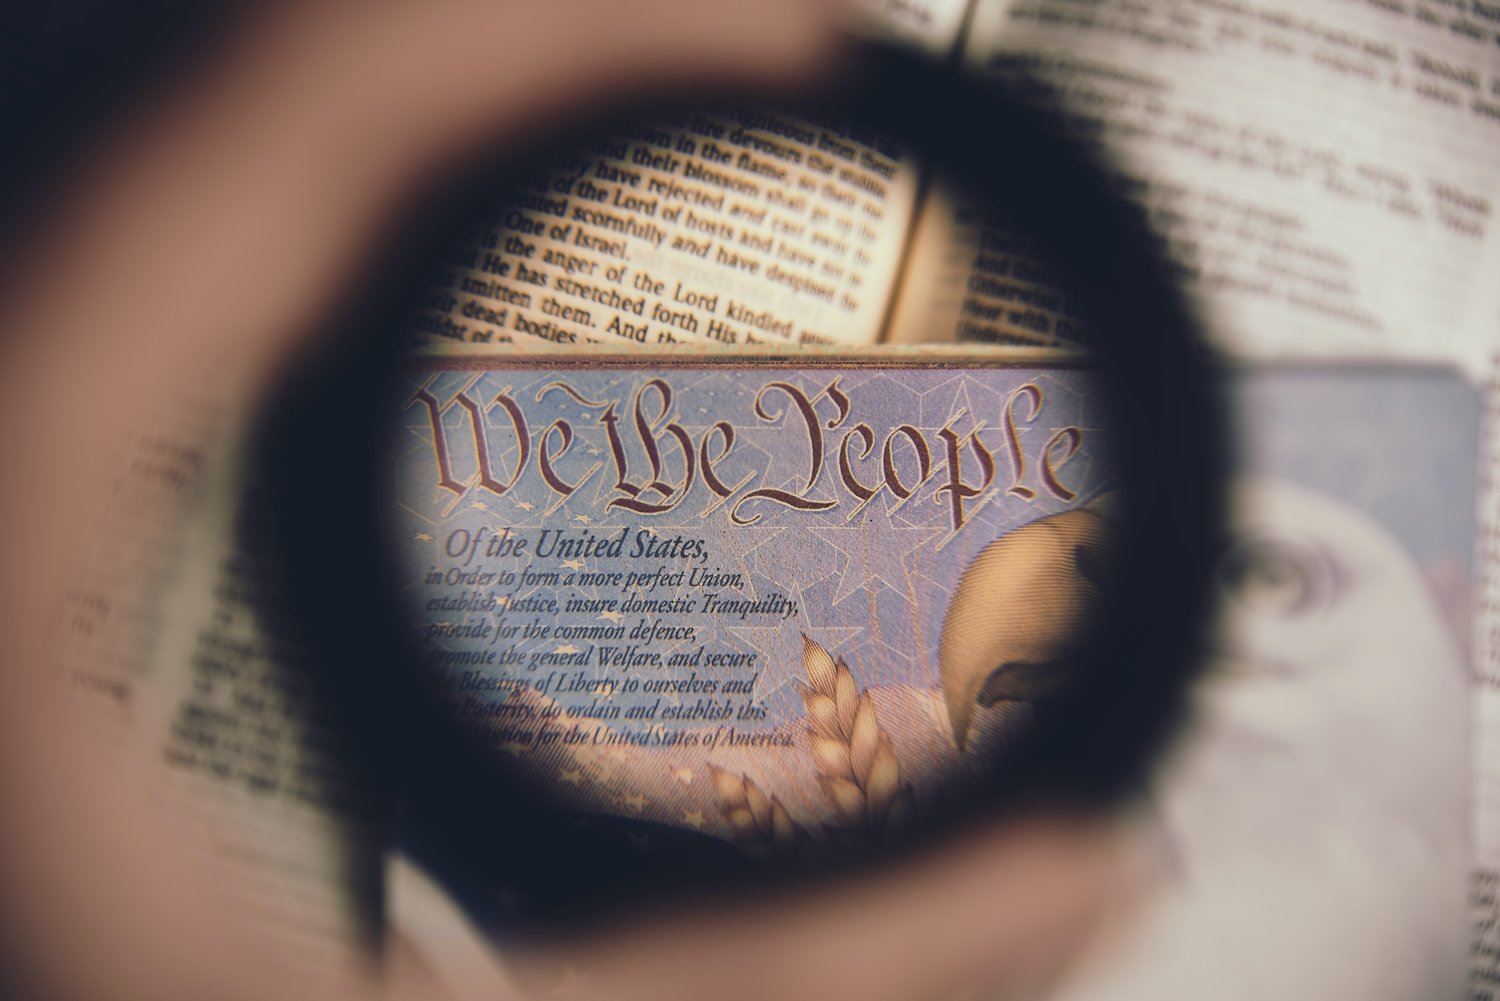 "We the People" phrase from the Constitution Preamble in focus.